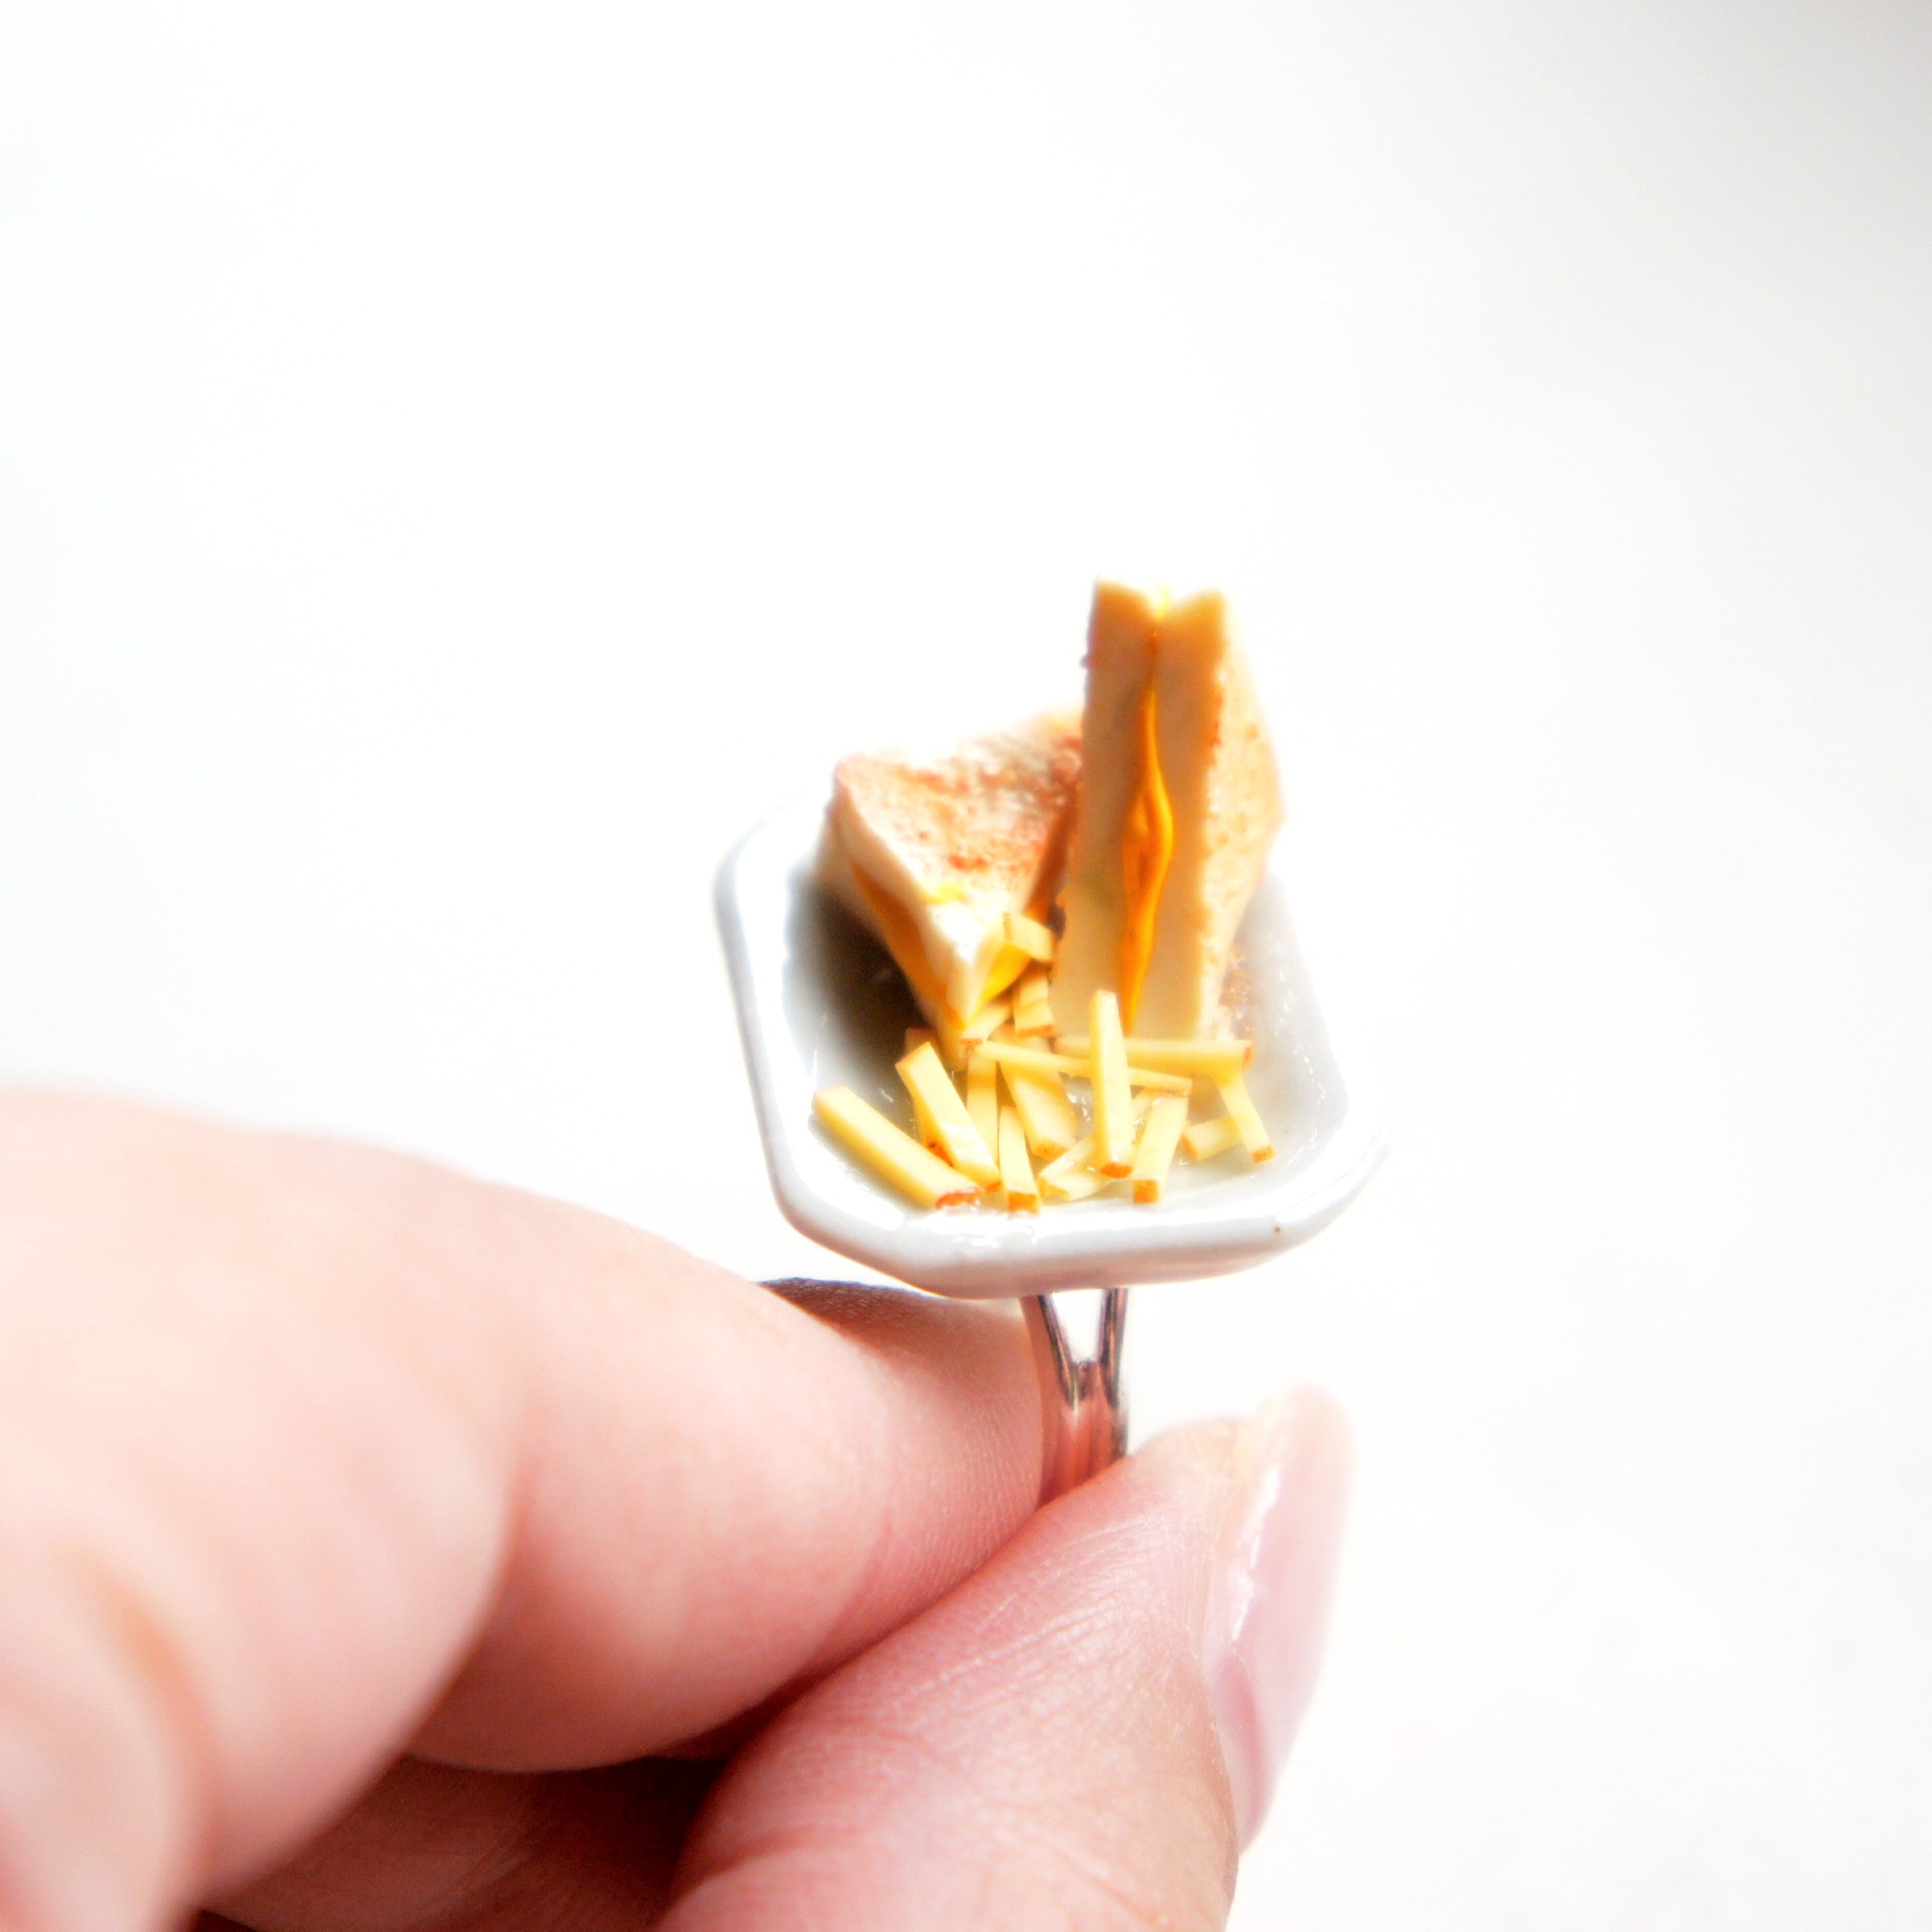 Grilled Cheese Sandwich and Fries Ring - Jillicious charms and accessories